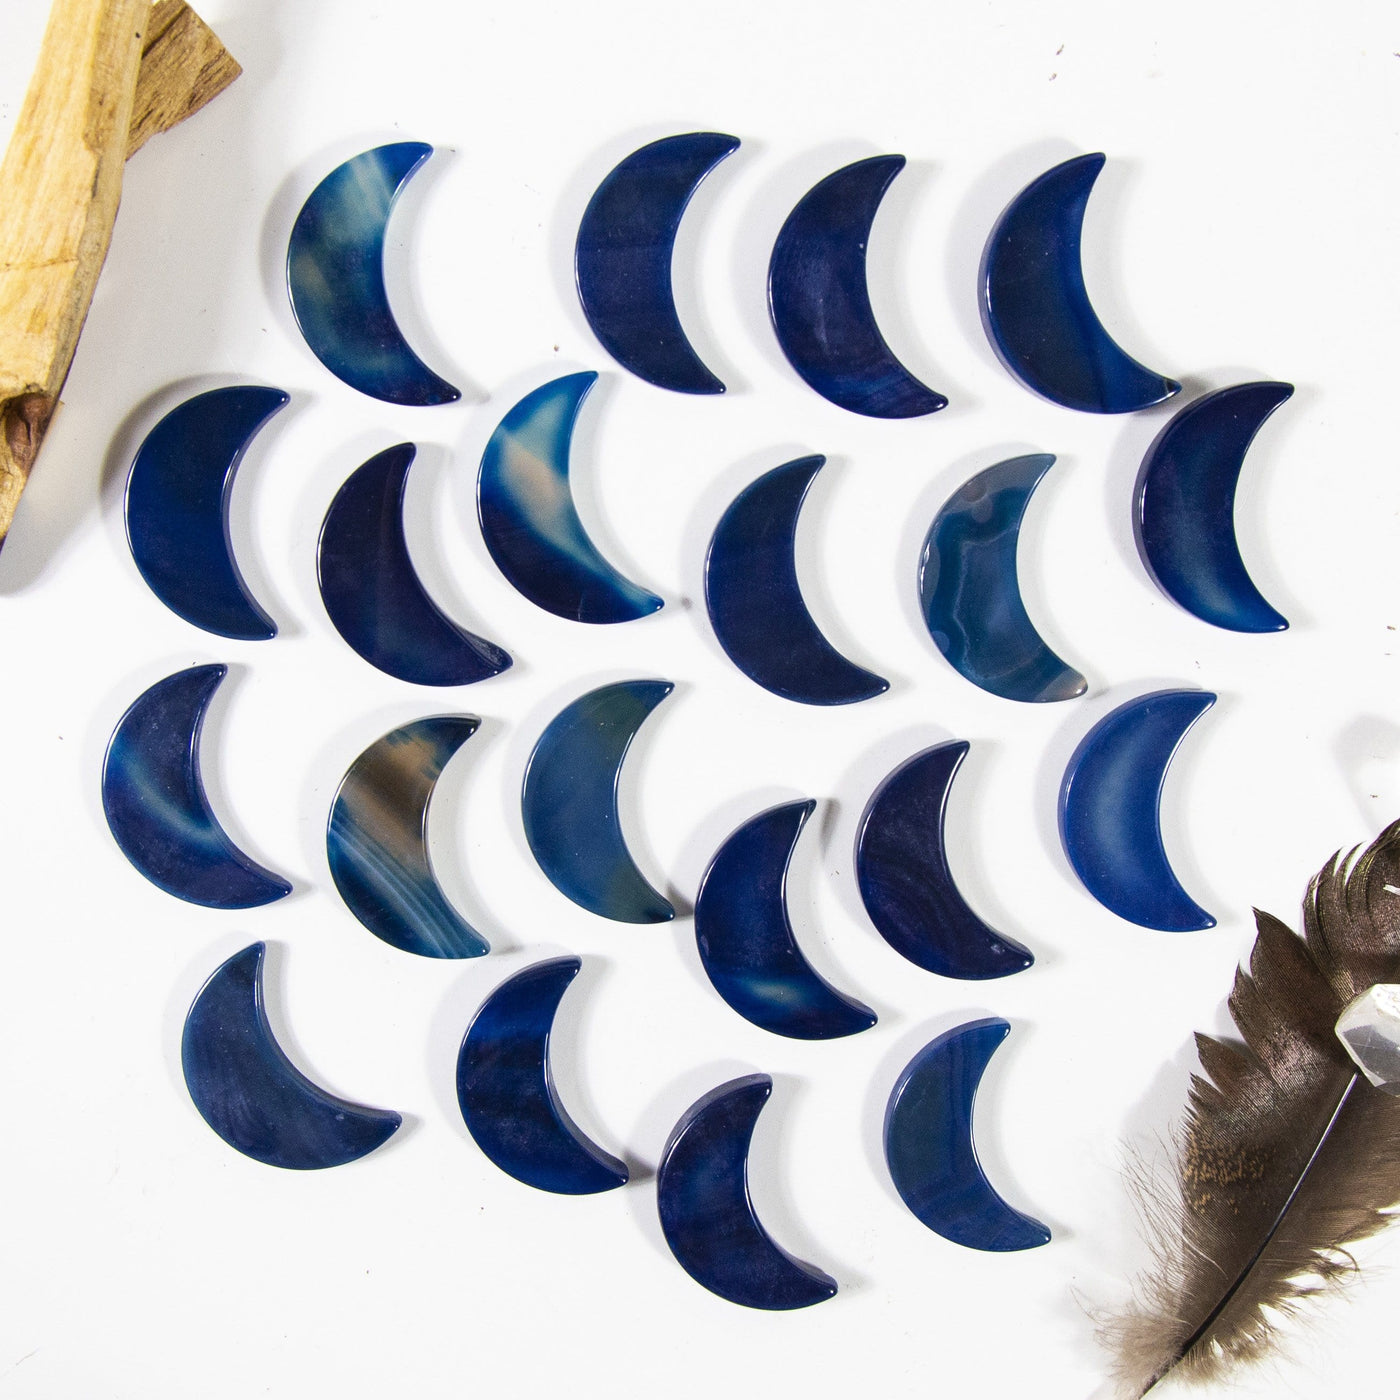 Many blue agate moons on a white surface displaying variation in pattern and color.